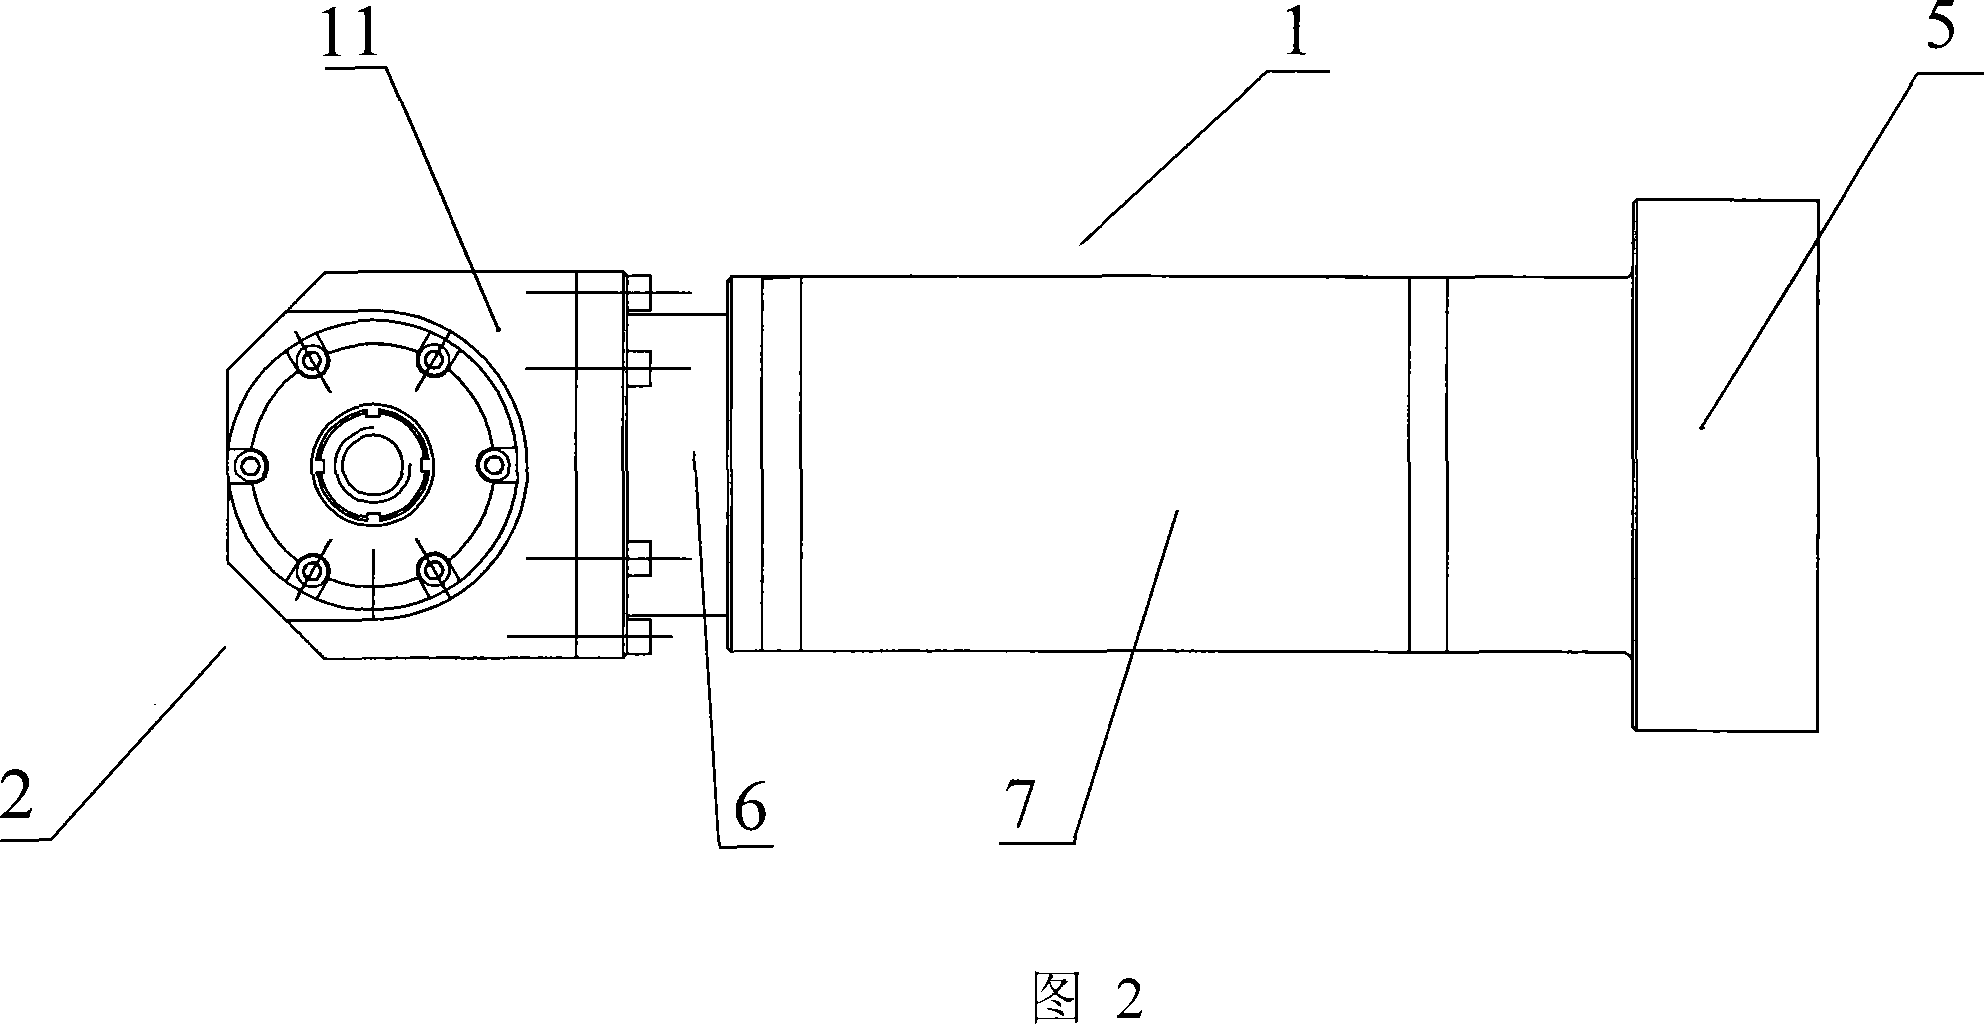 Bevel-gear right-angle milling head